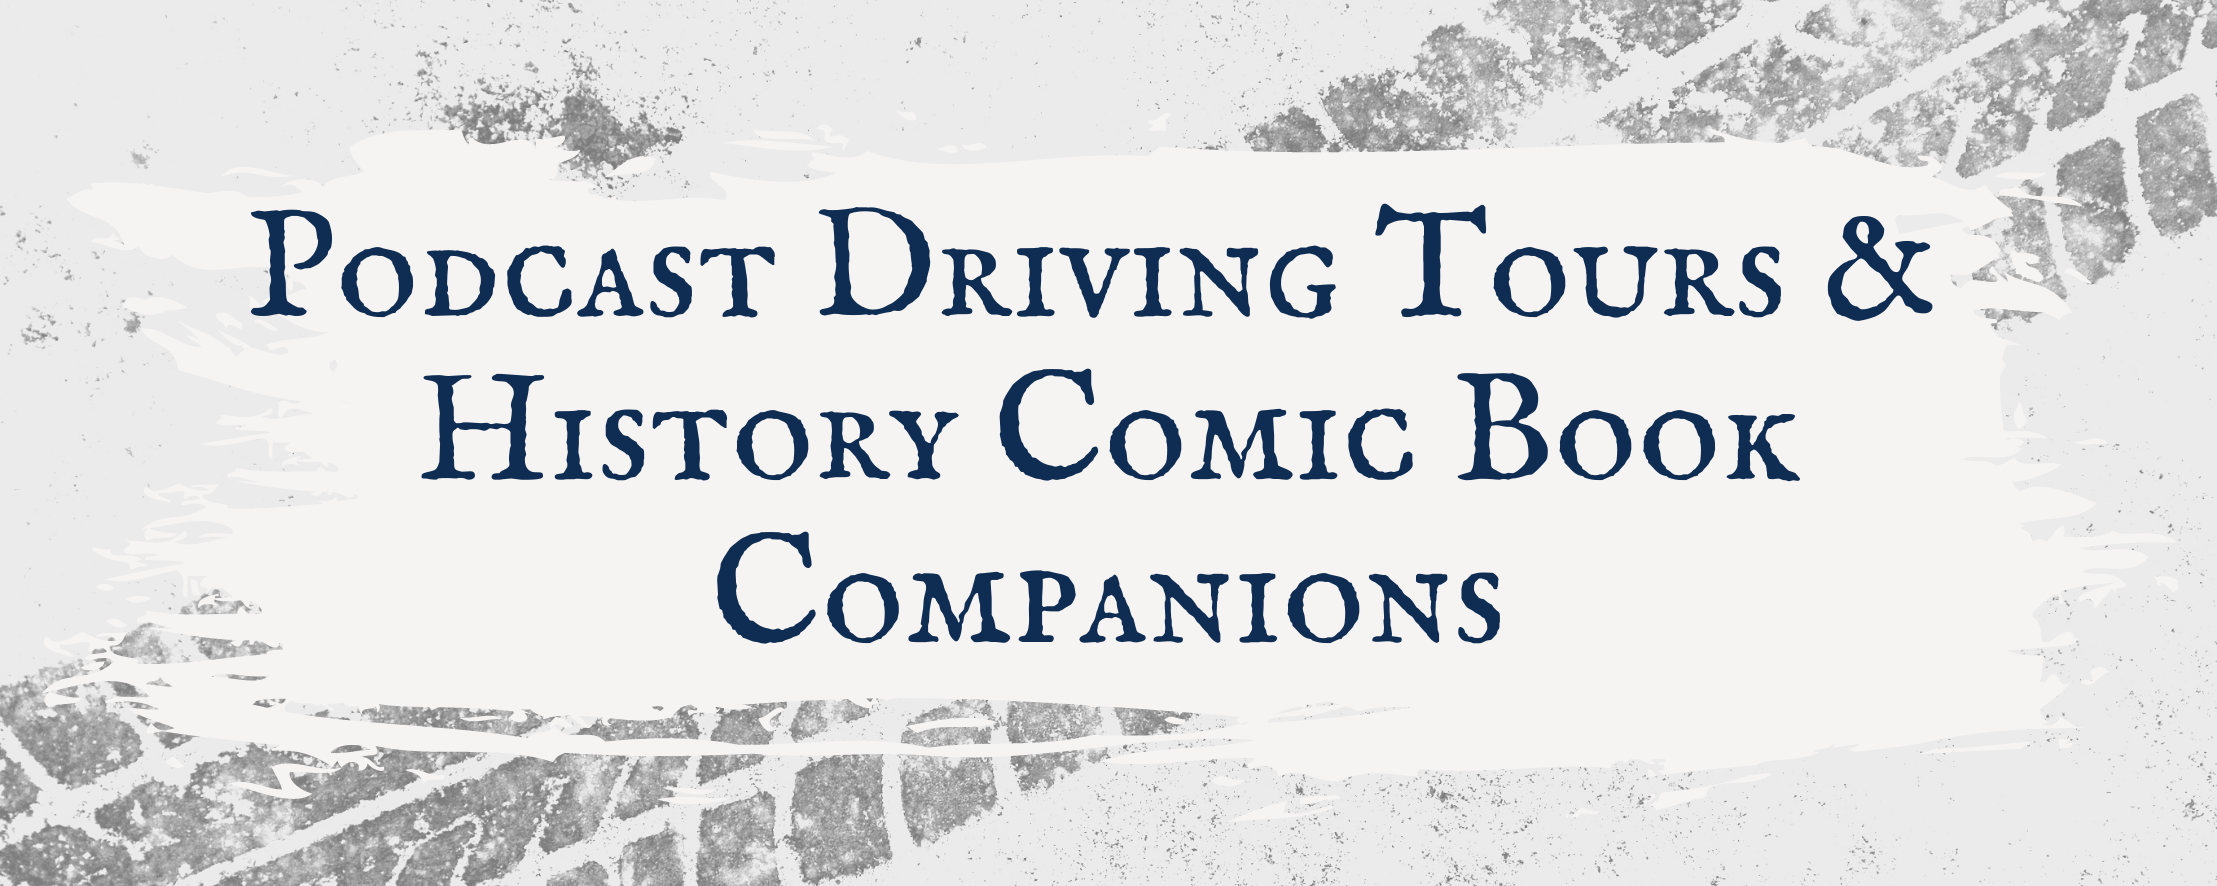 Podcast Driving Tours & History Comic Book Companions